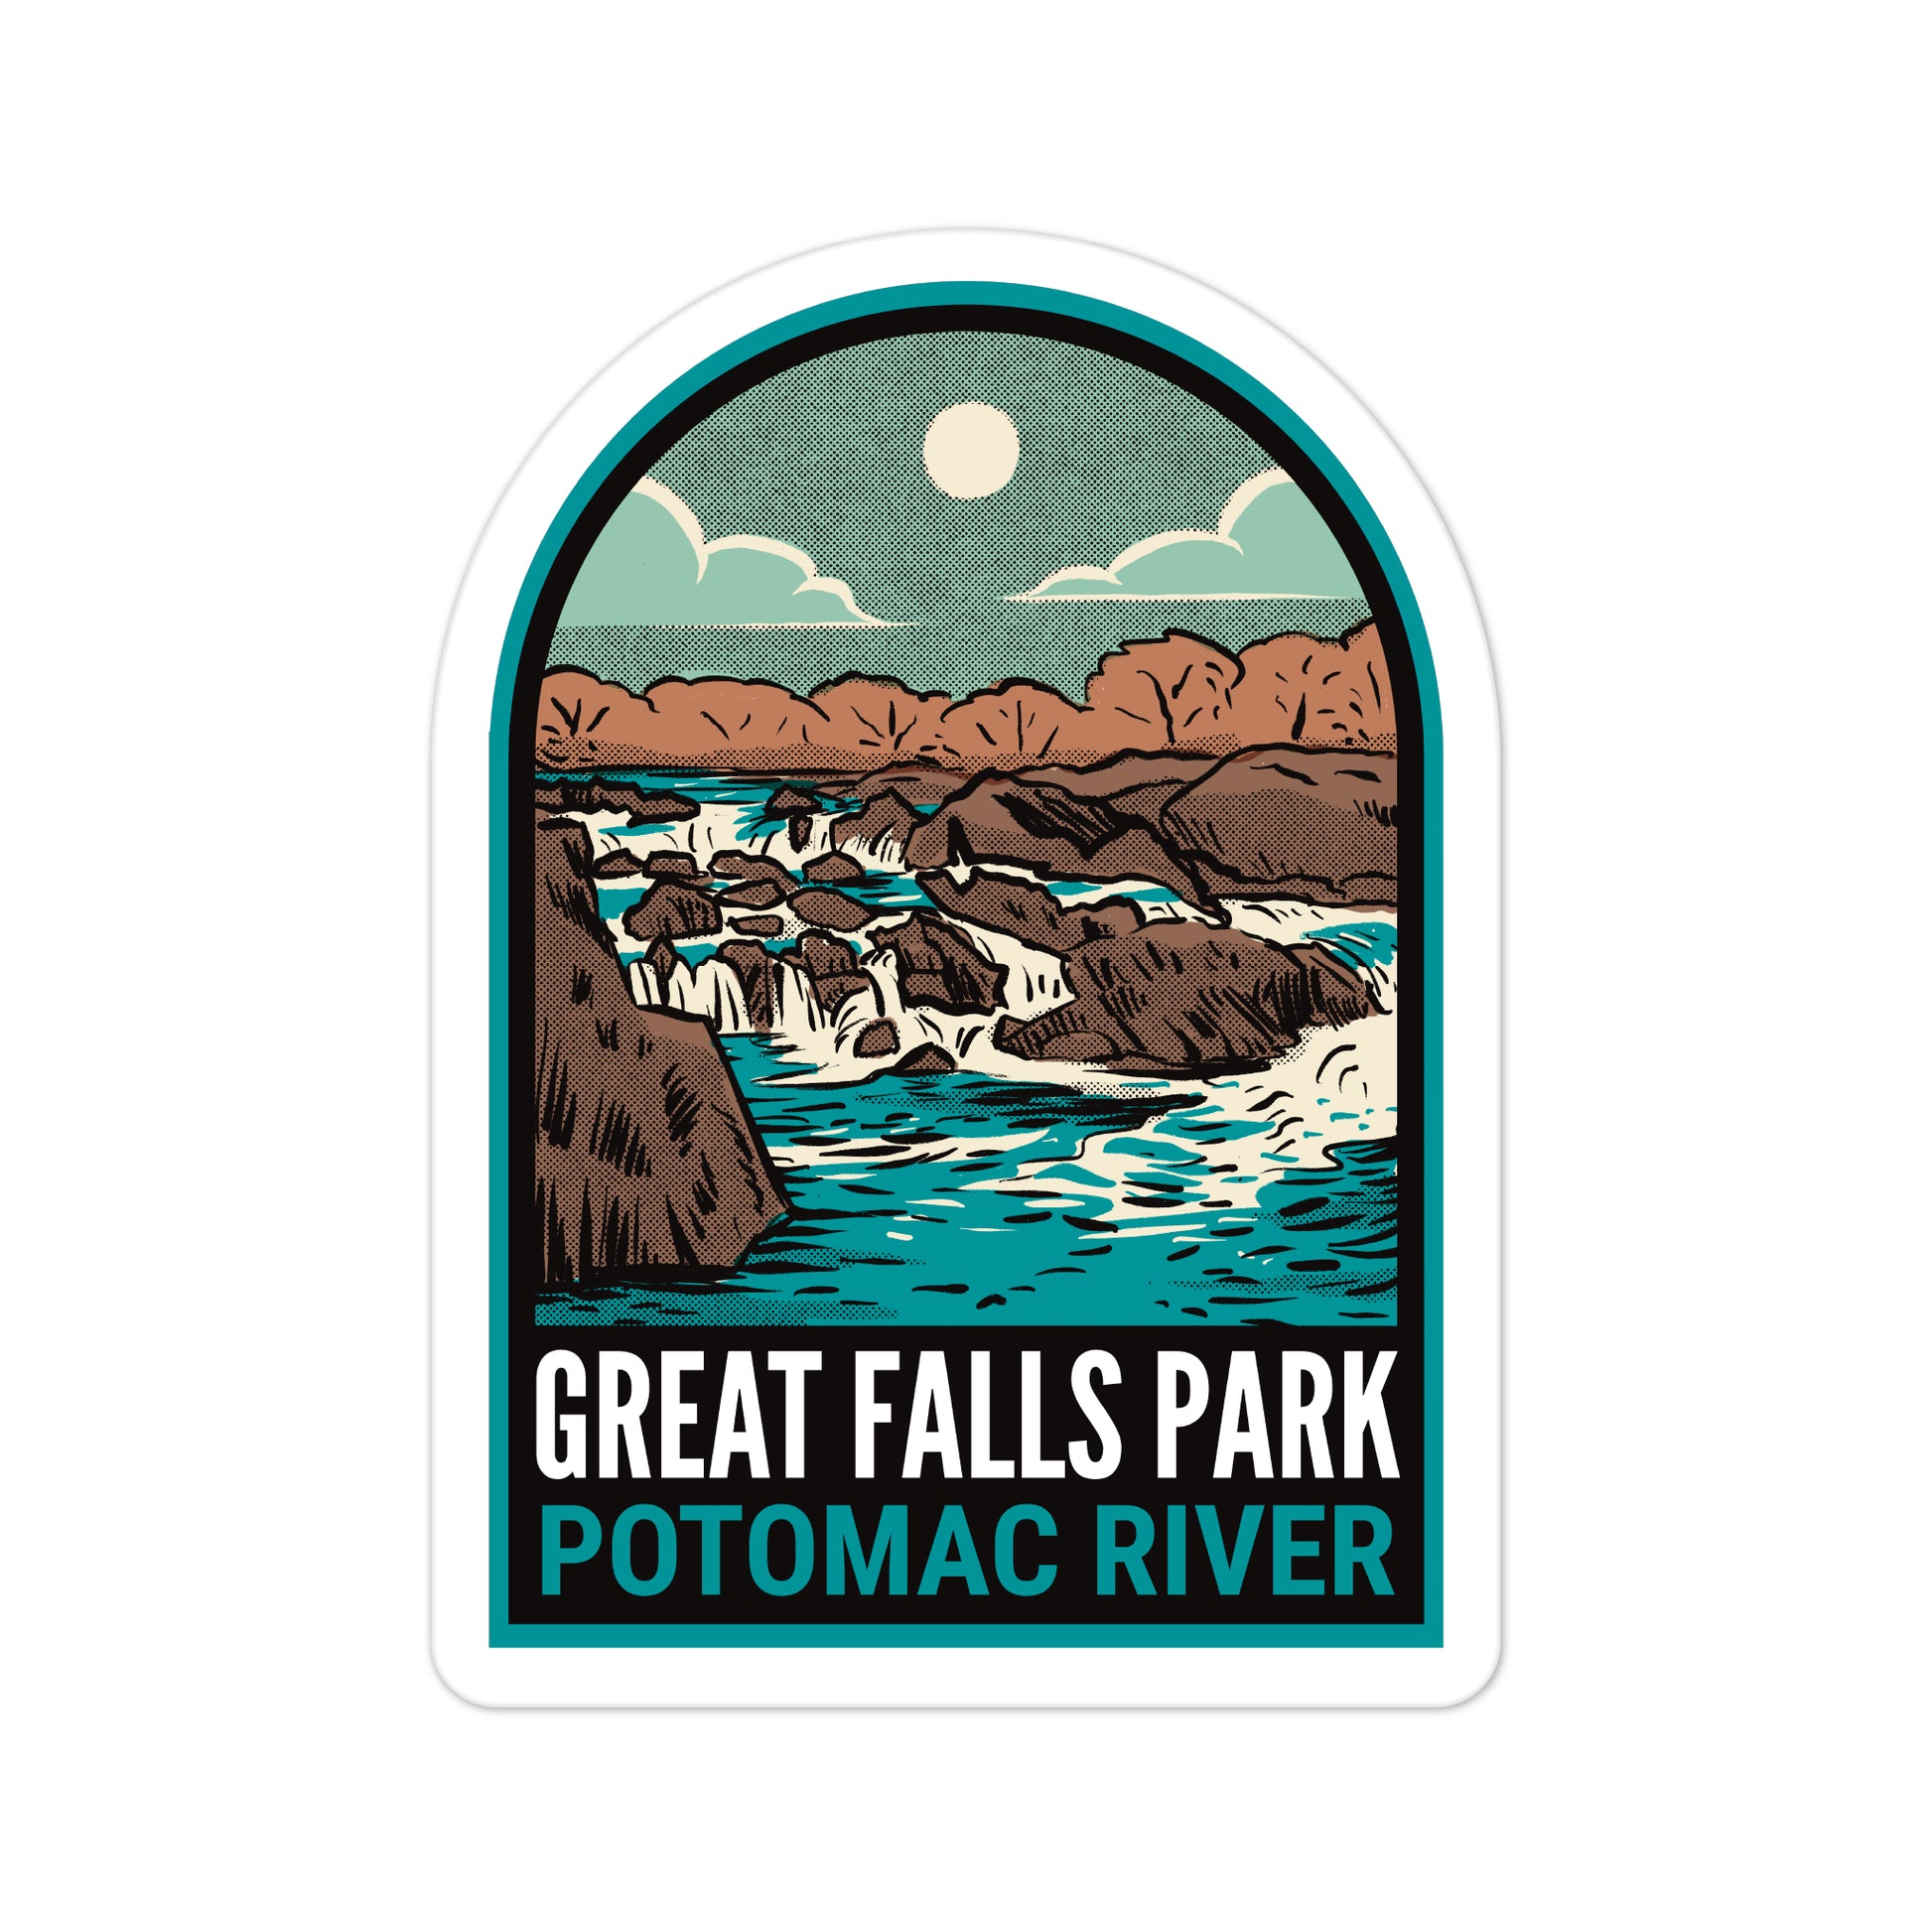 A sticker of Great Falls Park